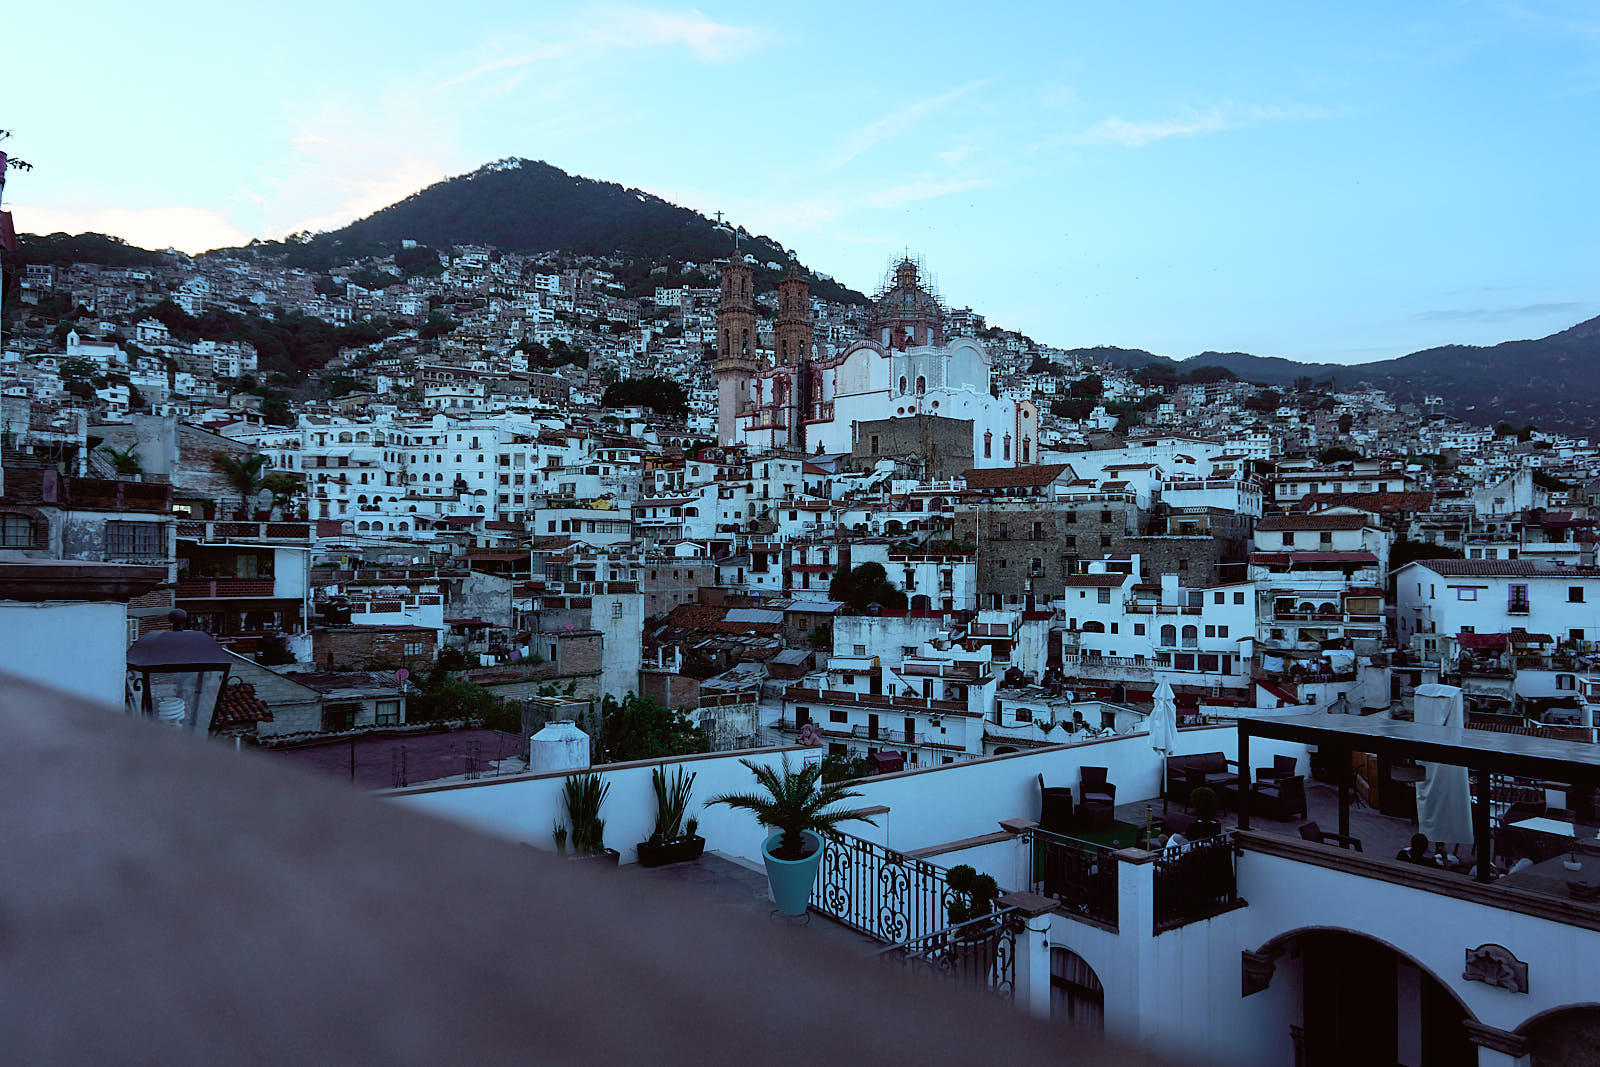 Gorgeous landscape of Taxco, Mexico